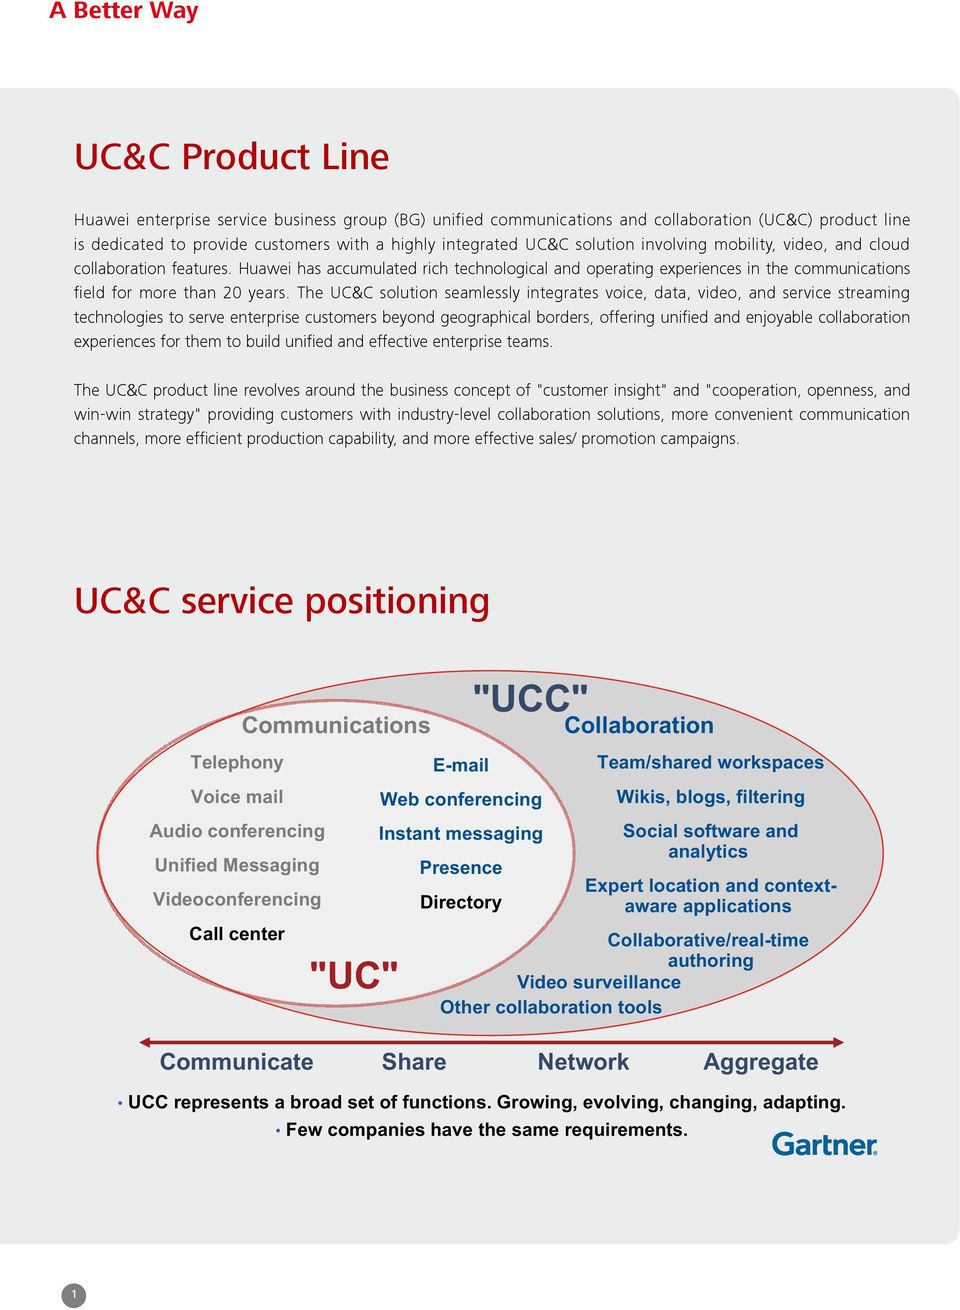 The UC&C solution seamlessly integrates voice, data, video, and service streaming technologies to serve enterprise customers beyond geographical borders, offering unified and enjoyable experiences